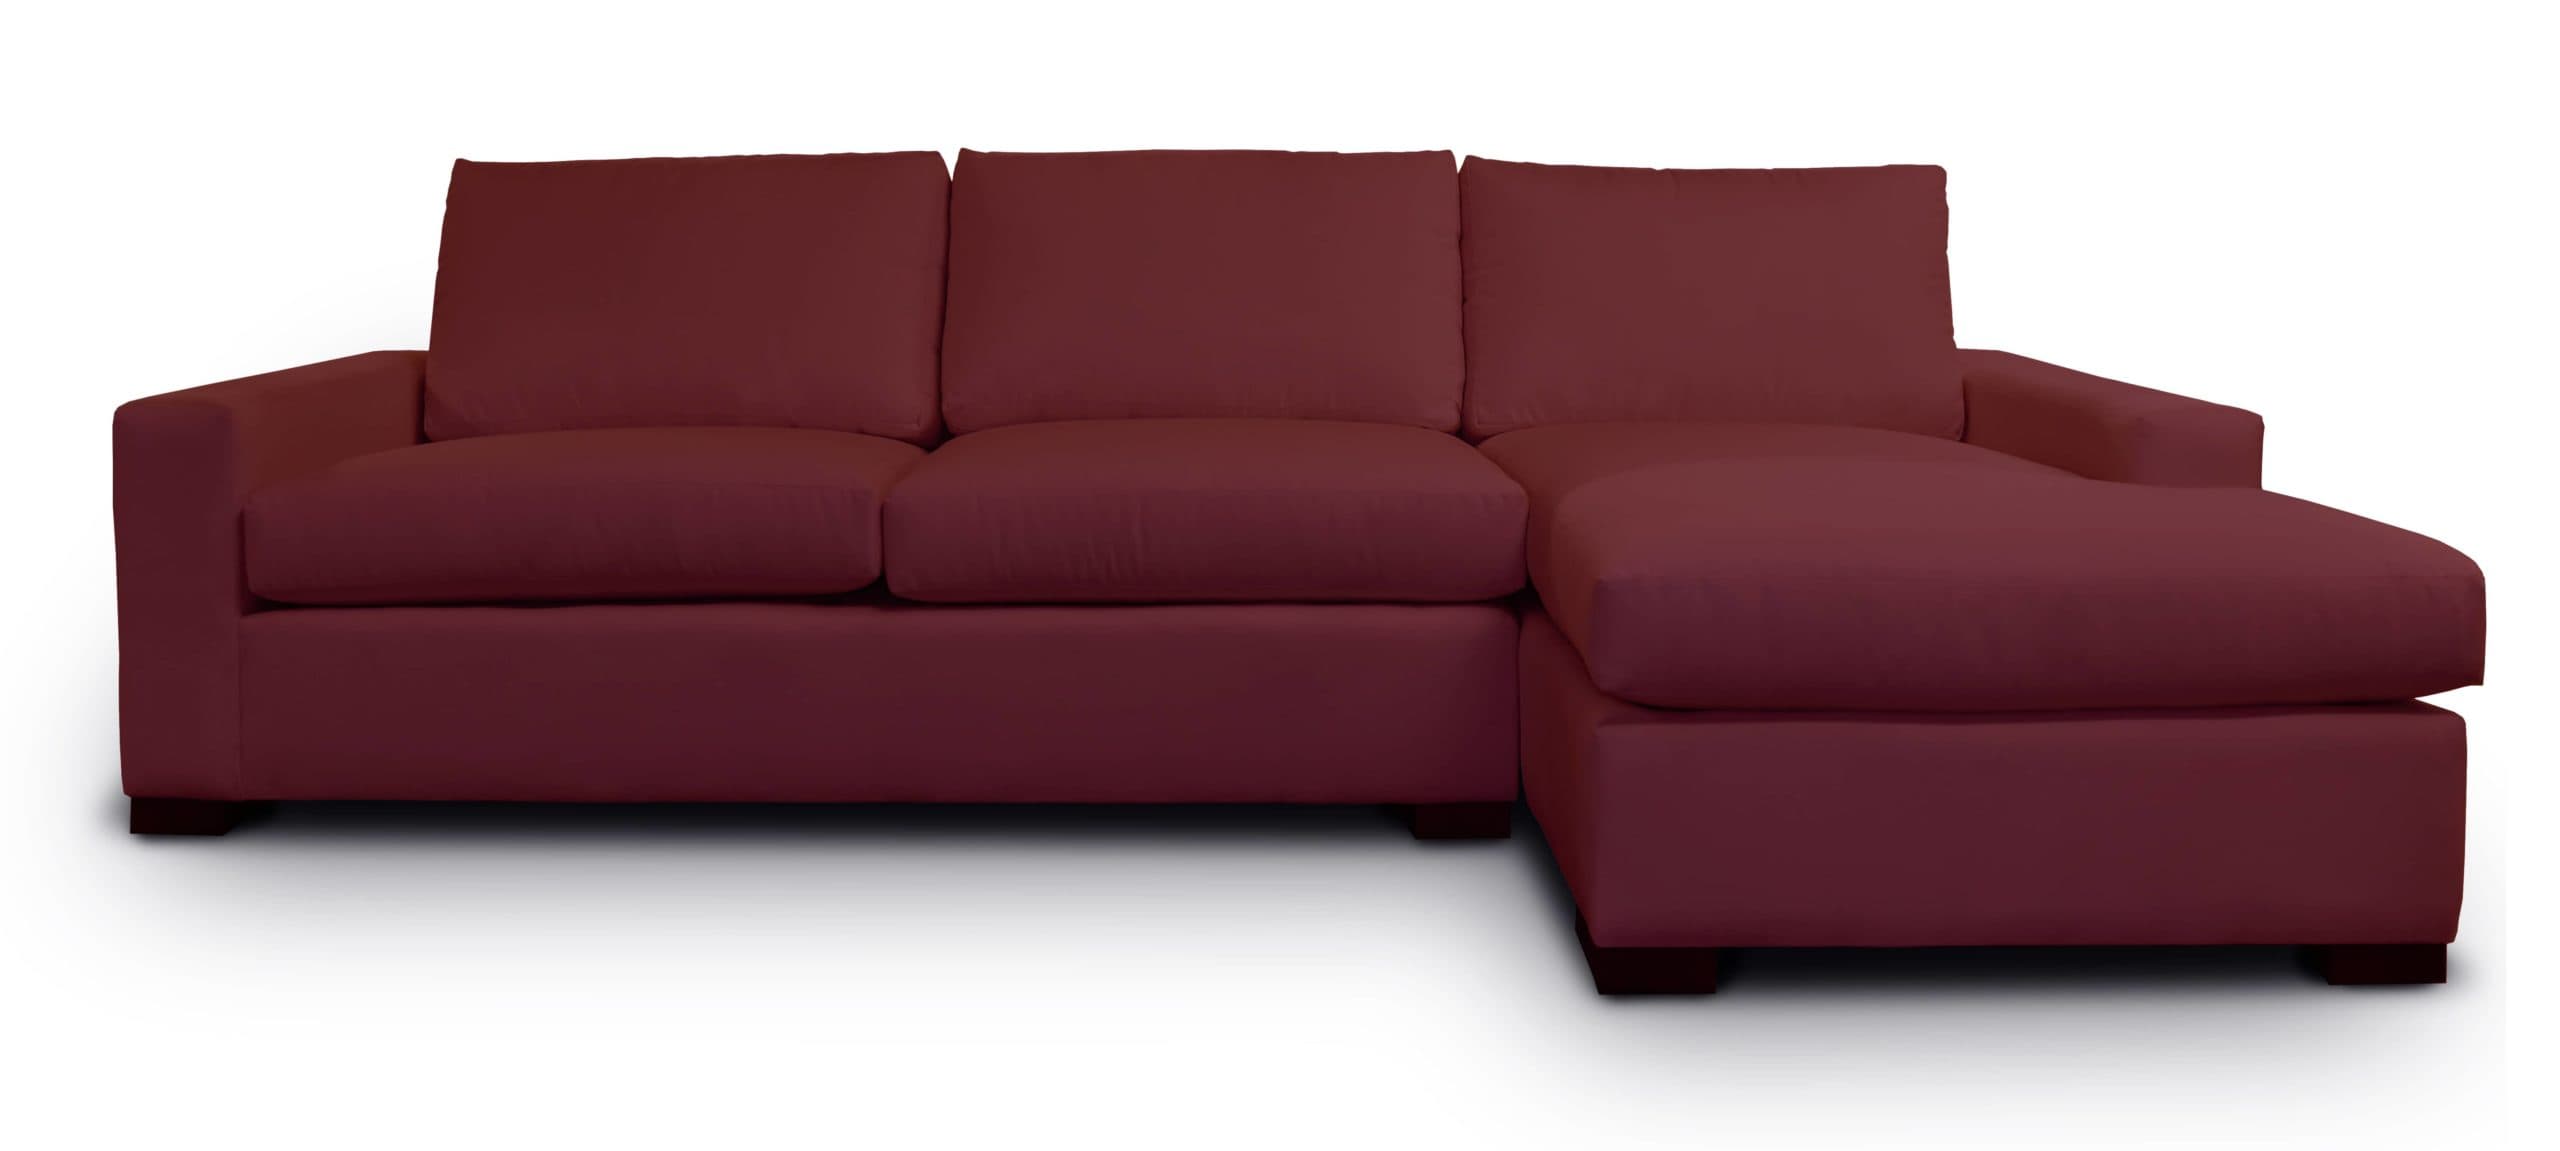 McQueen Chaise Sectional in Merlot Fabric